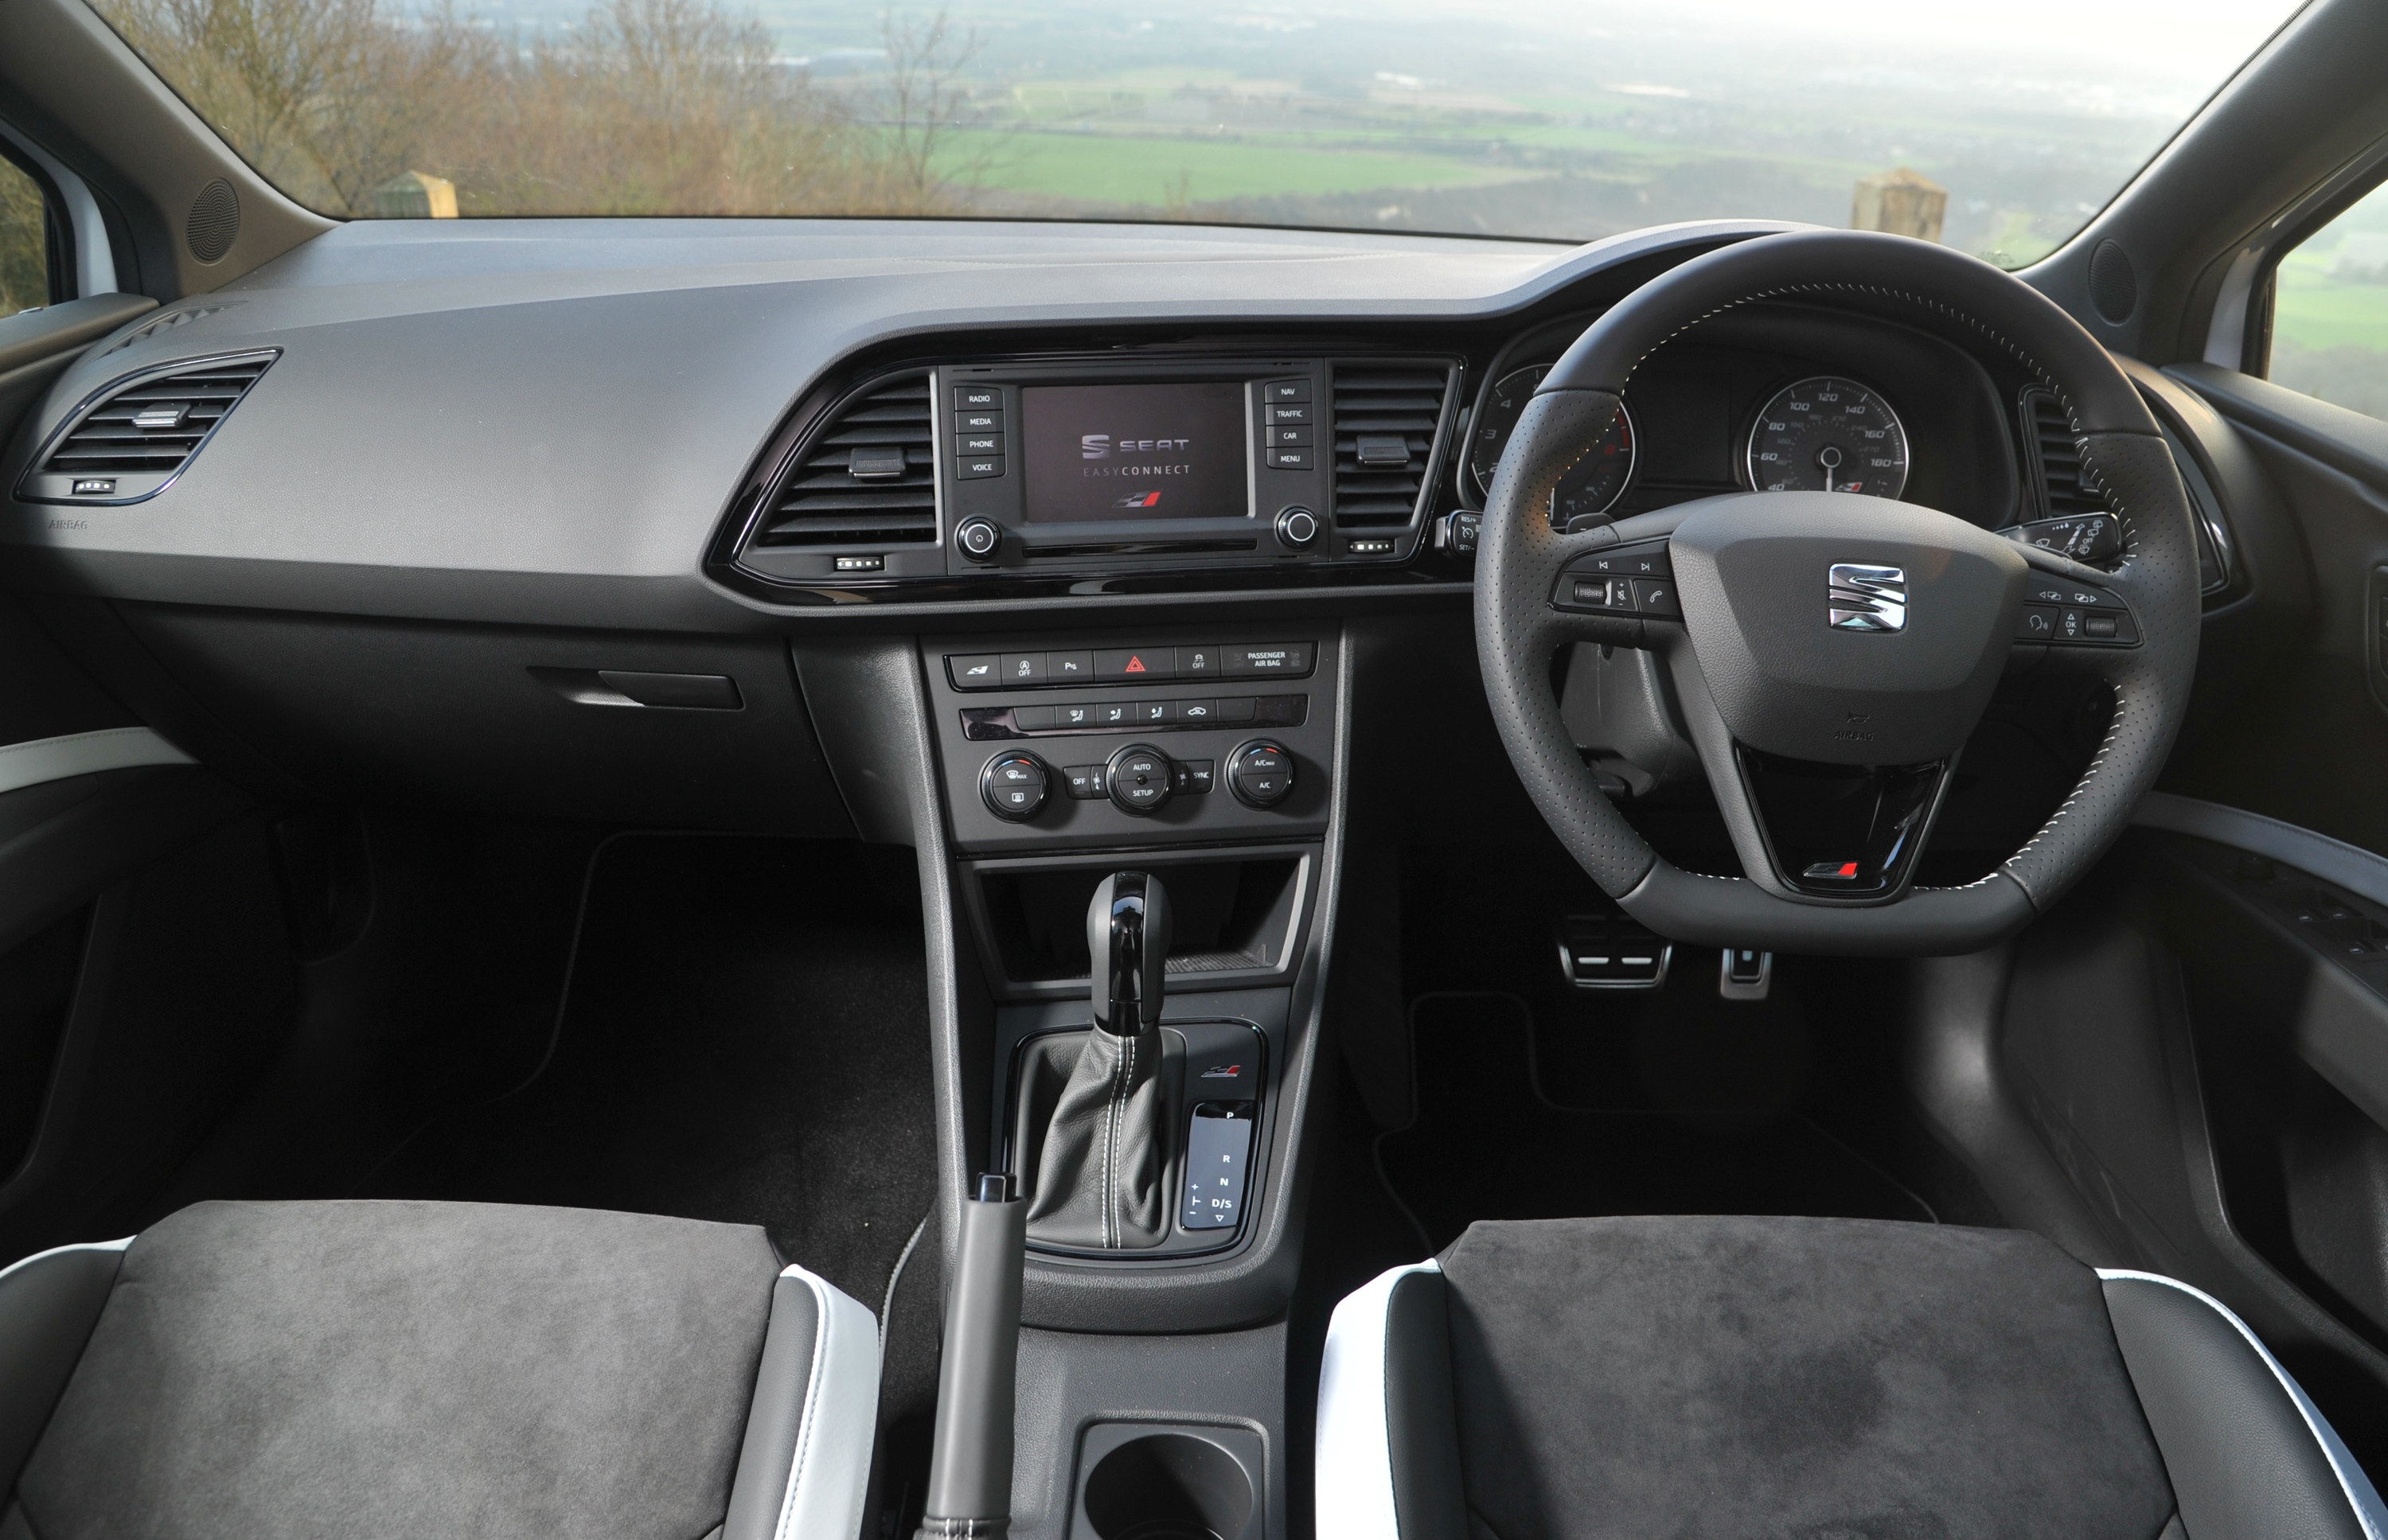 Seat Leon ST Cupra 280 review by Sunday Times Driving